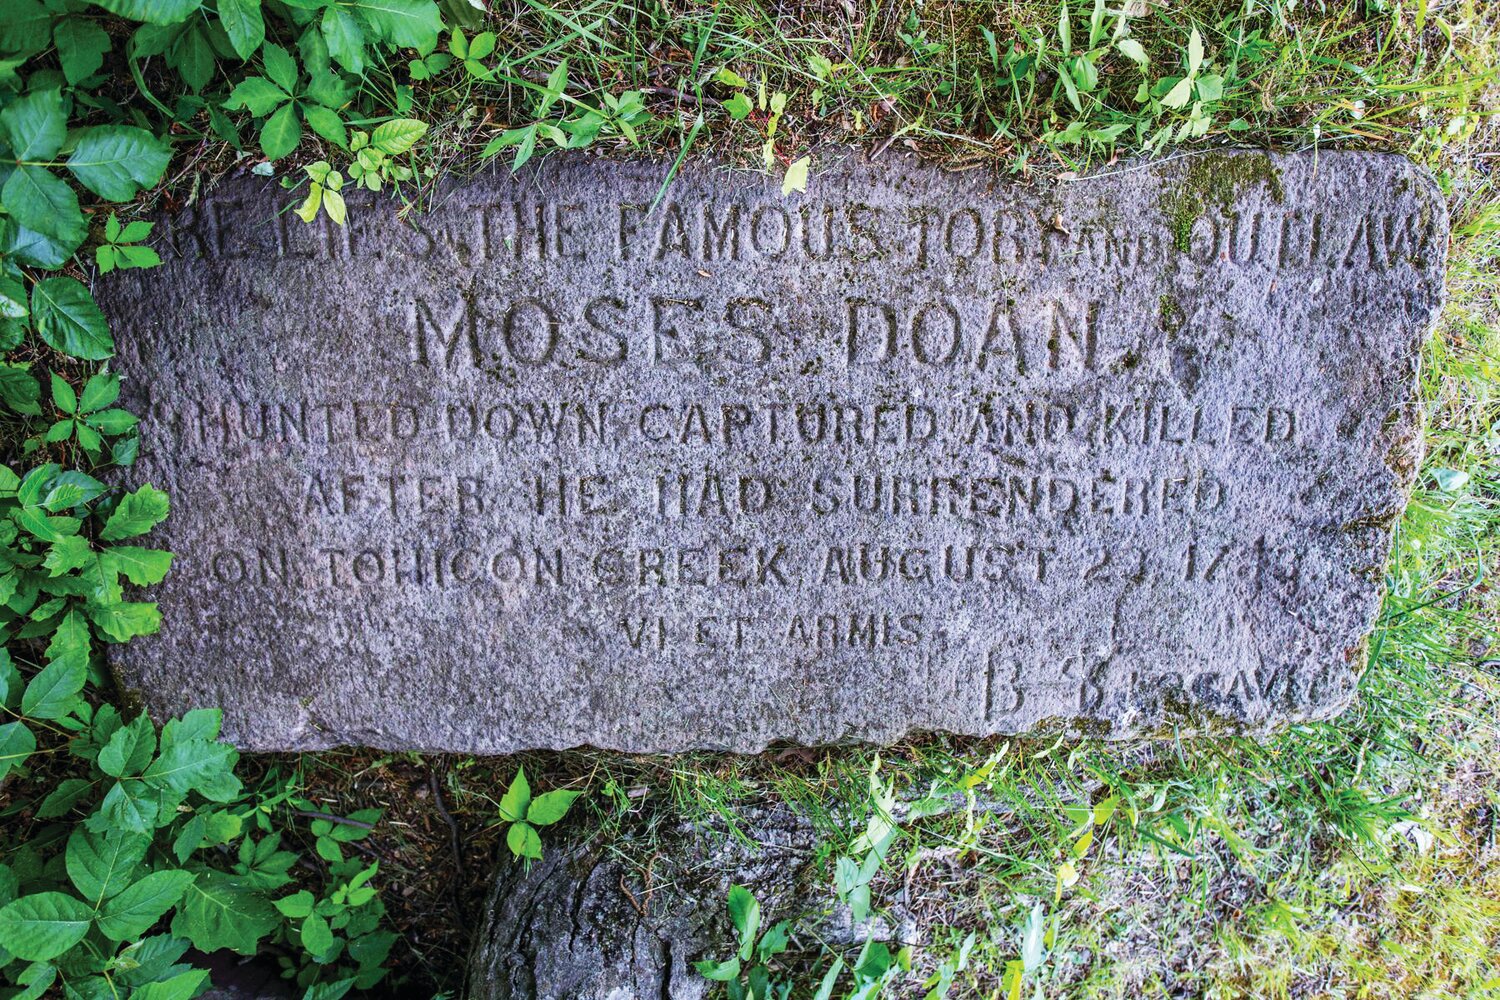 The Moses Doan grave marker, on loan courtesy of the Keller Family.